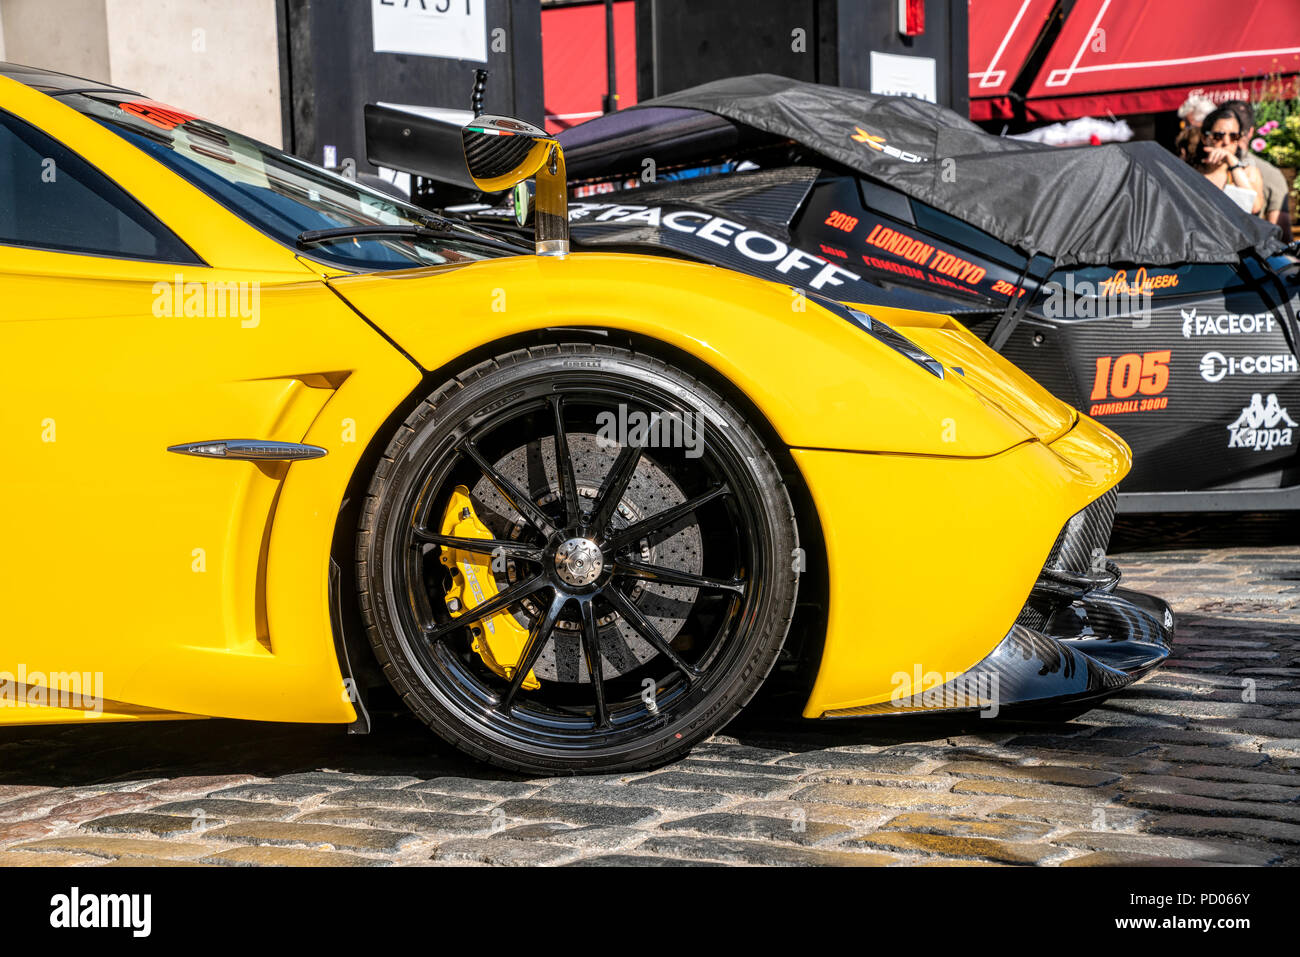 4 August 2018 - London, England. Yellow supercar Pagani Zonda displayed in Covent Garden, London for the gumball 3000 rally event. Stock Photo